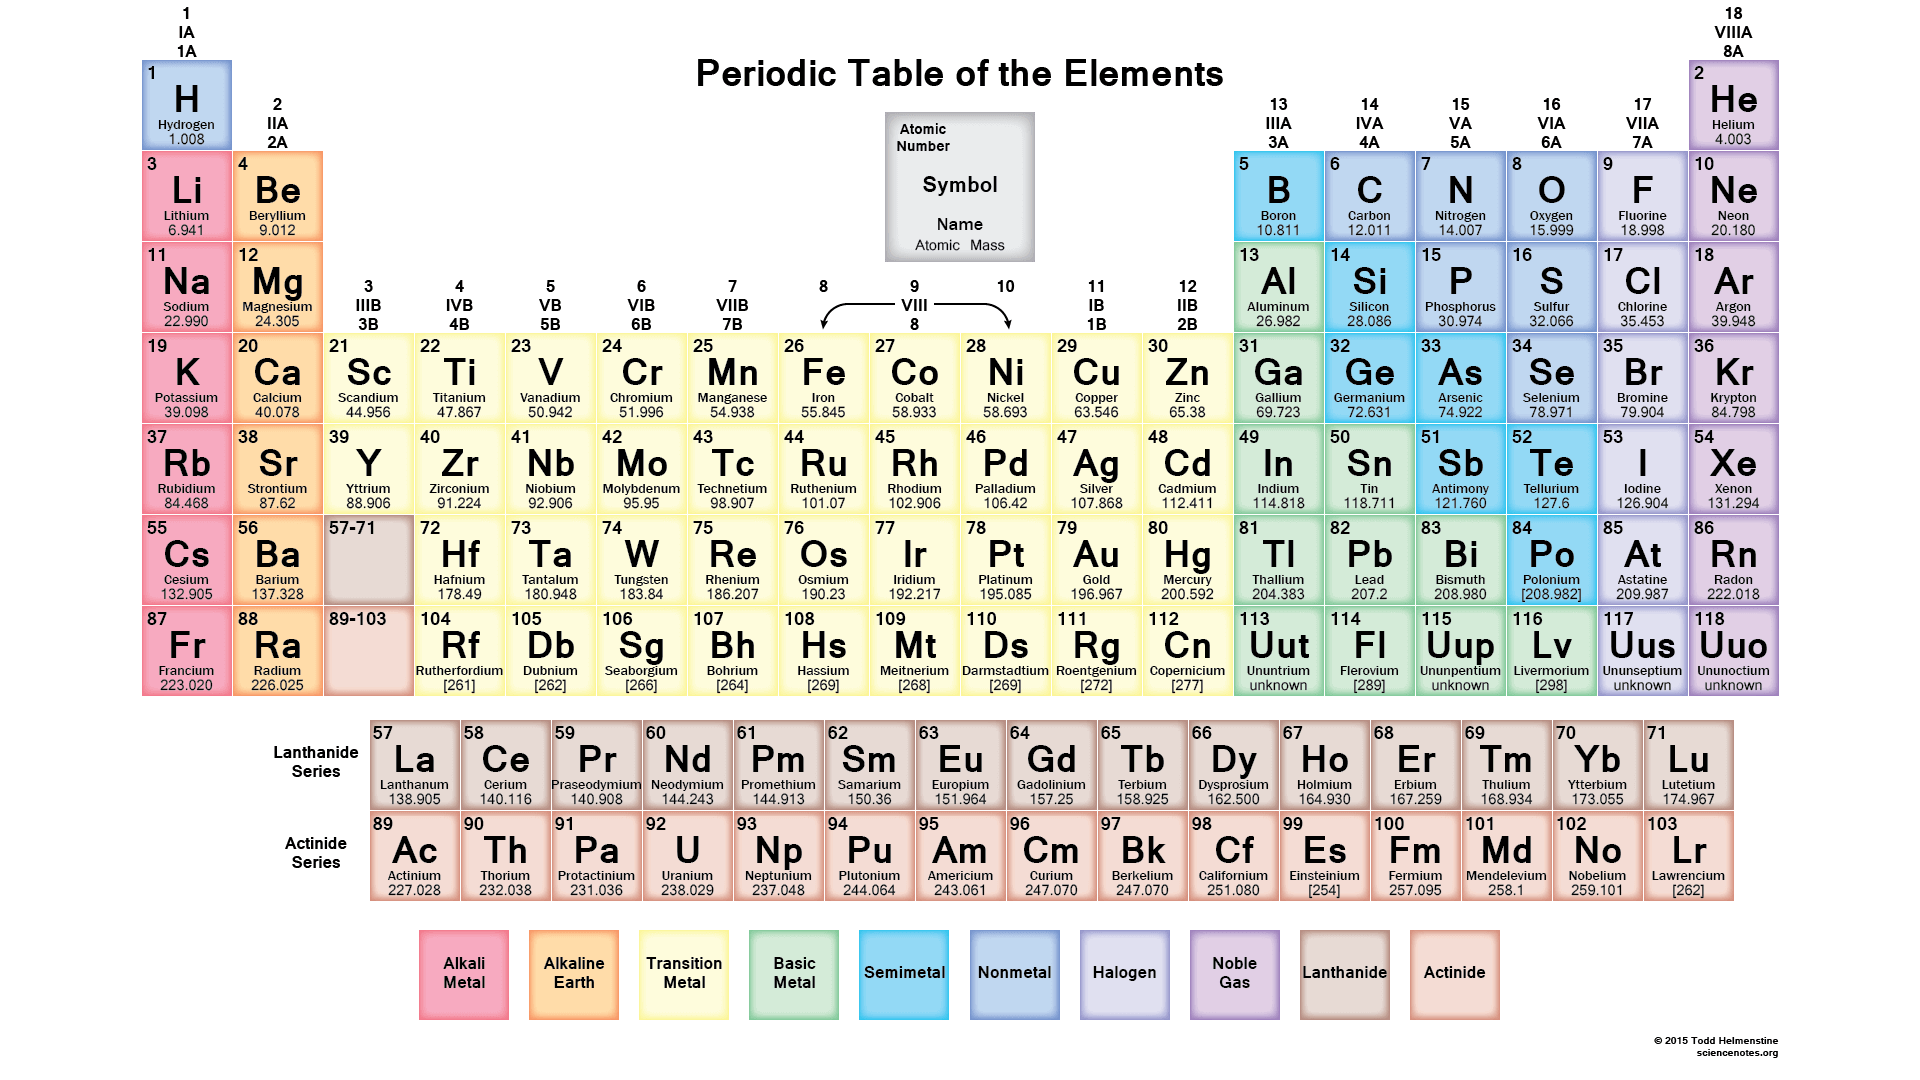 PeriodicTableMuted.png